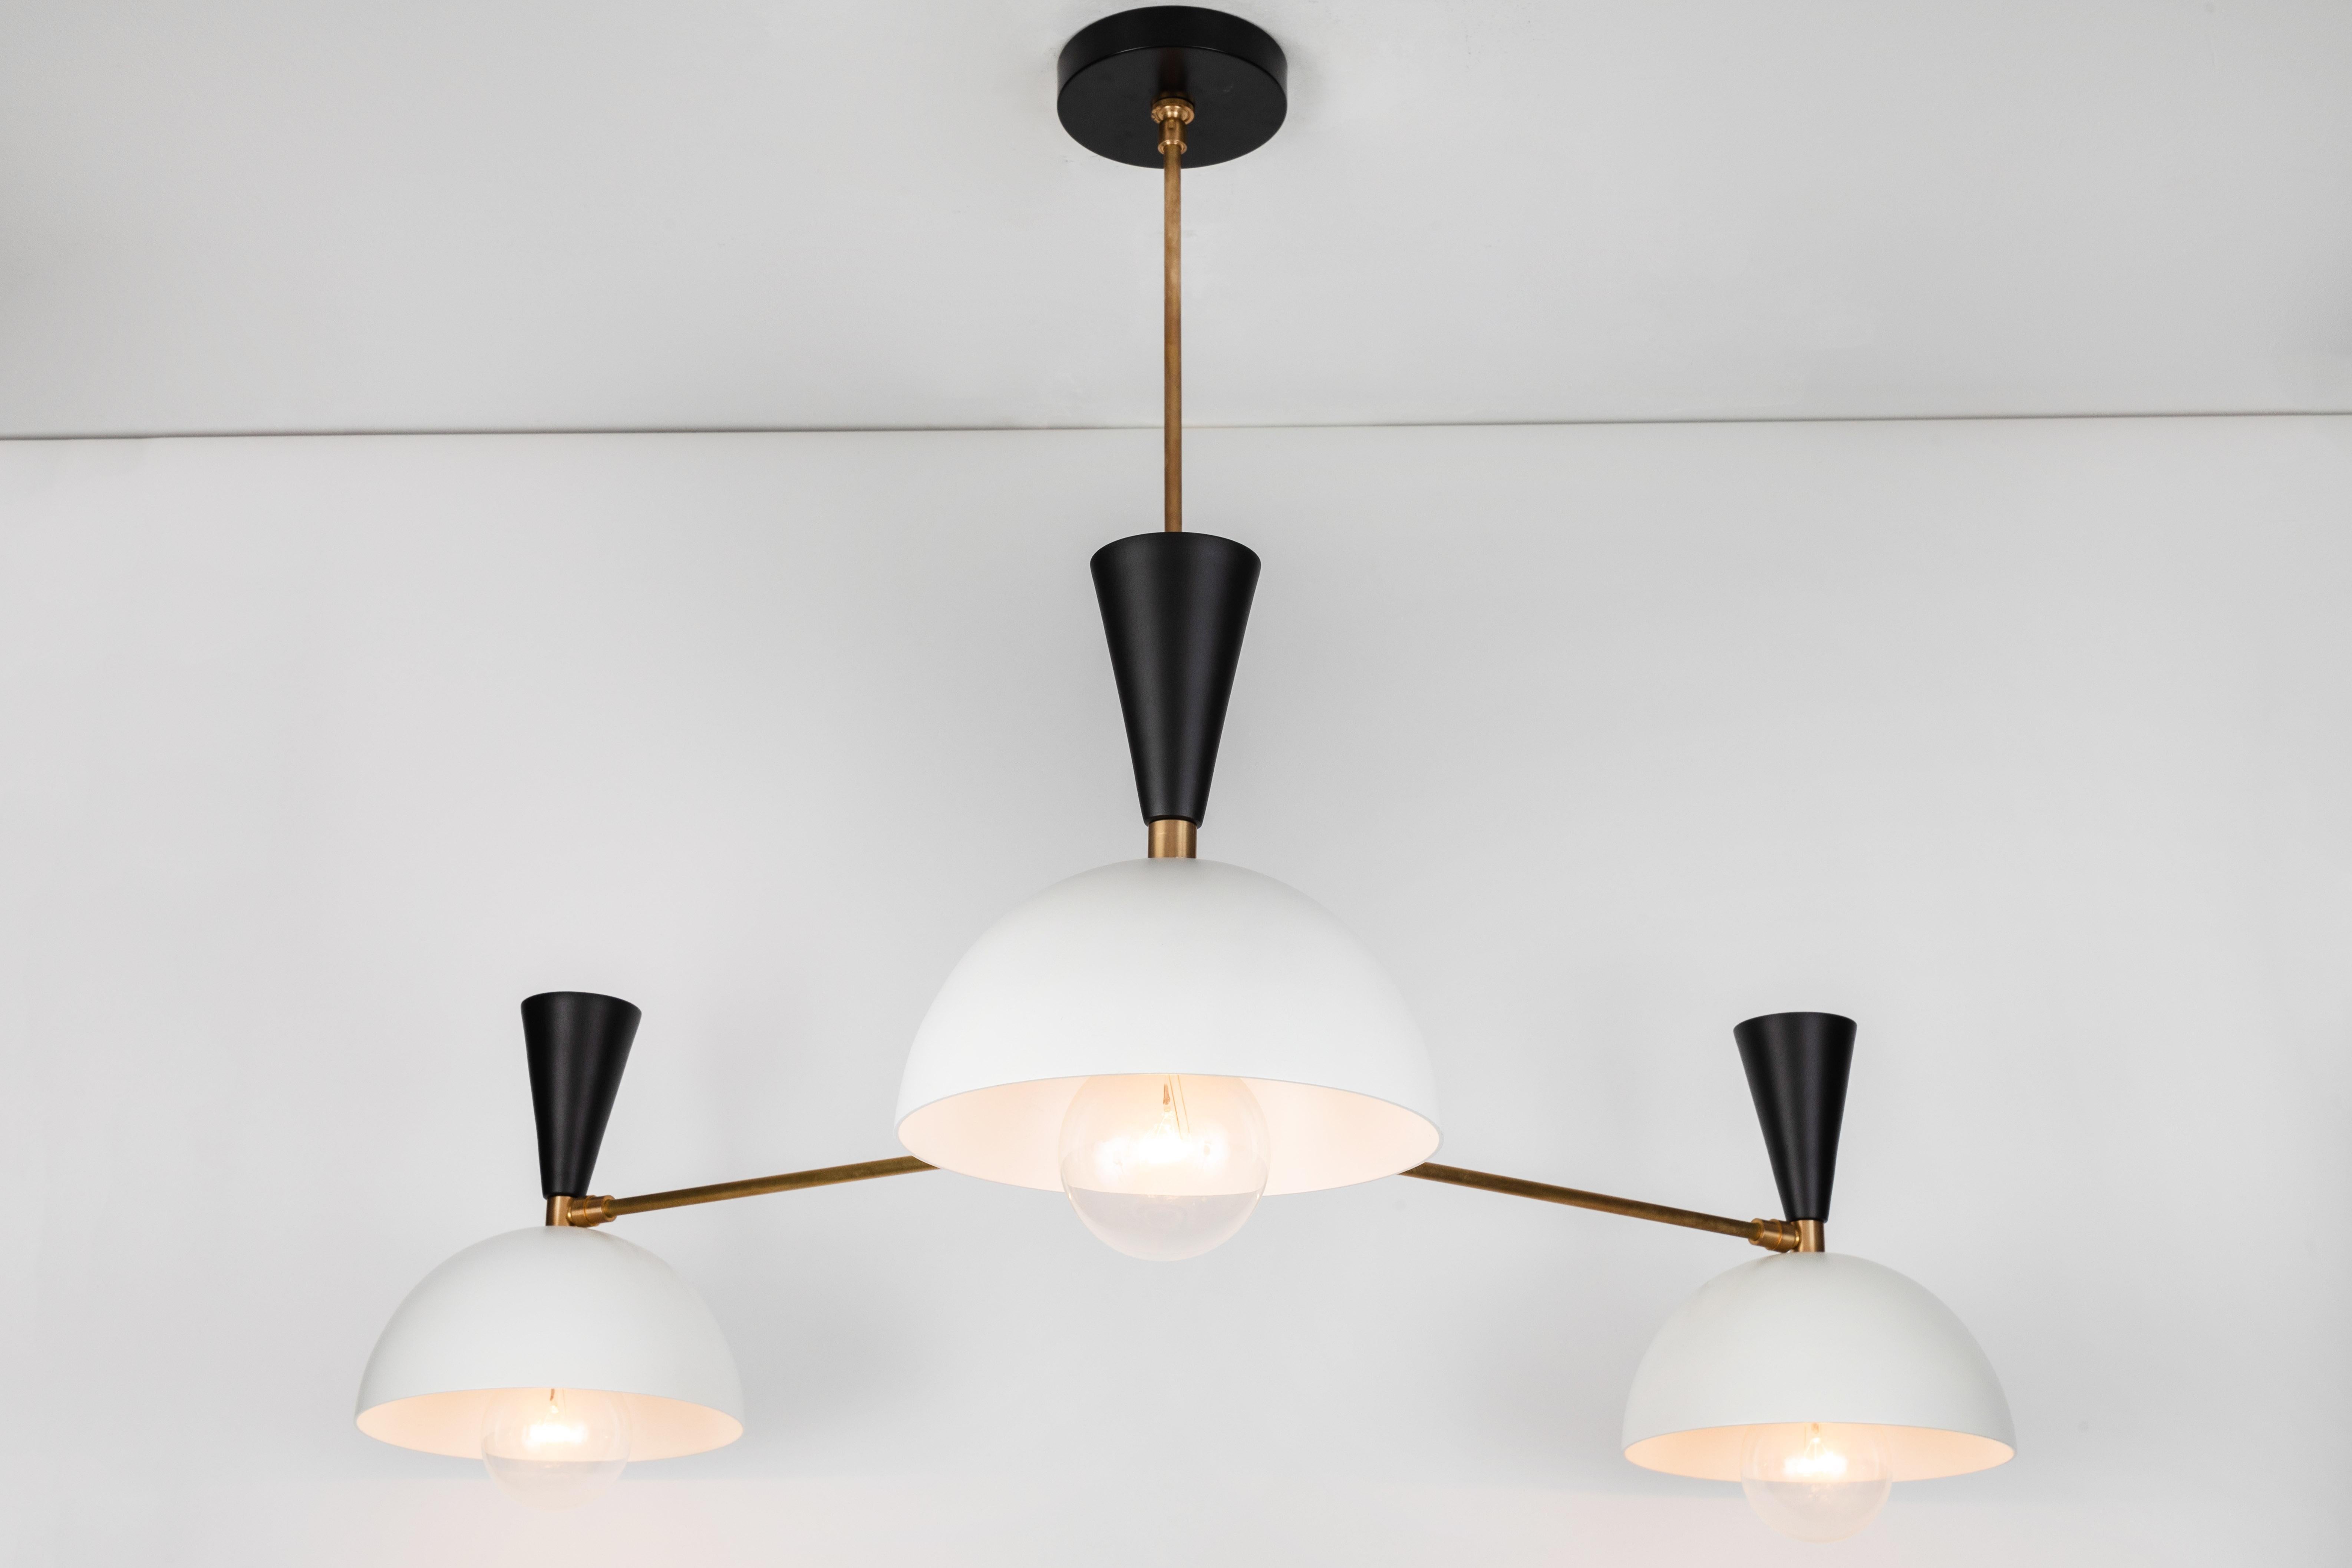 Large three-cone 'Lola II' chandelier in black, white and brass. 

Hand-fabricated by Los Angeles based designer and lighting professional Alvaro Benitez, this highly refined chandelier is reminiscent of the iconic midcentury Italian designs of